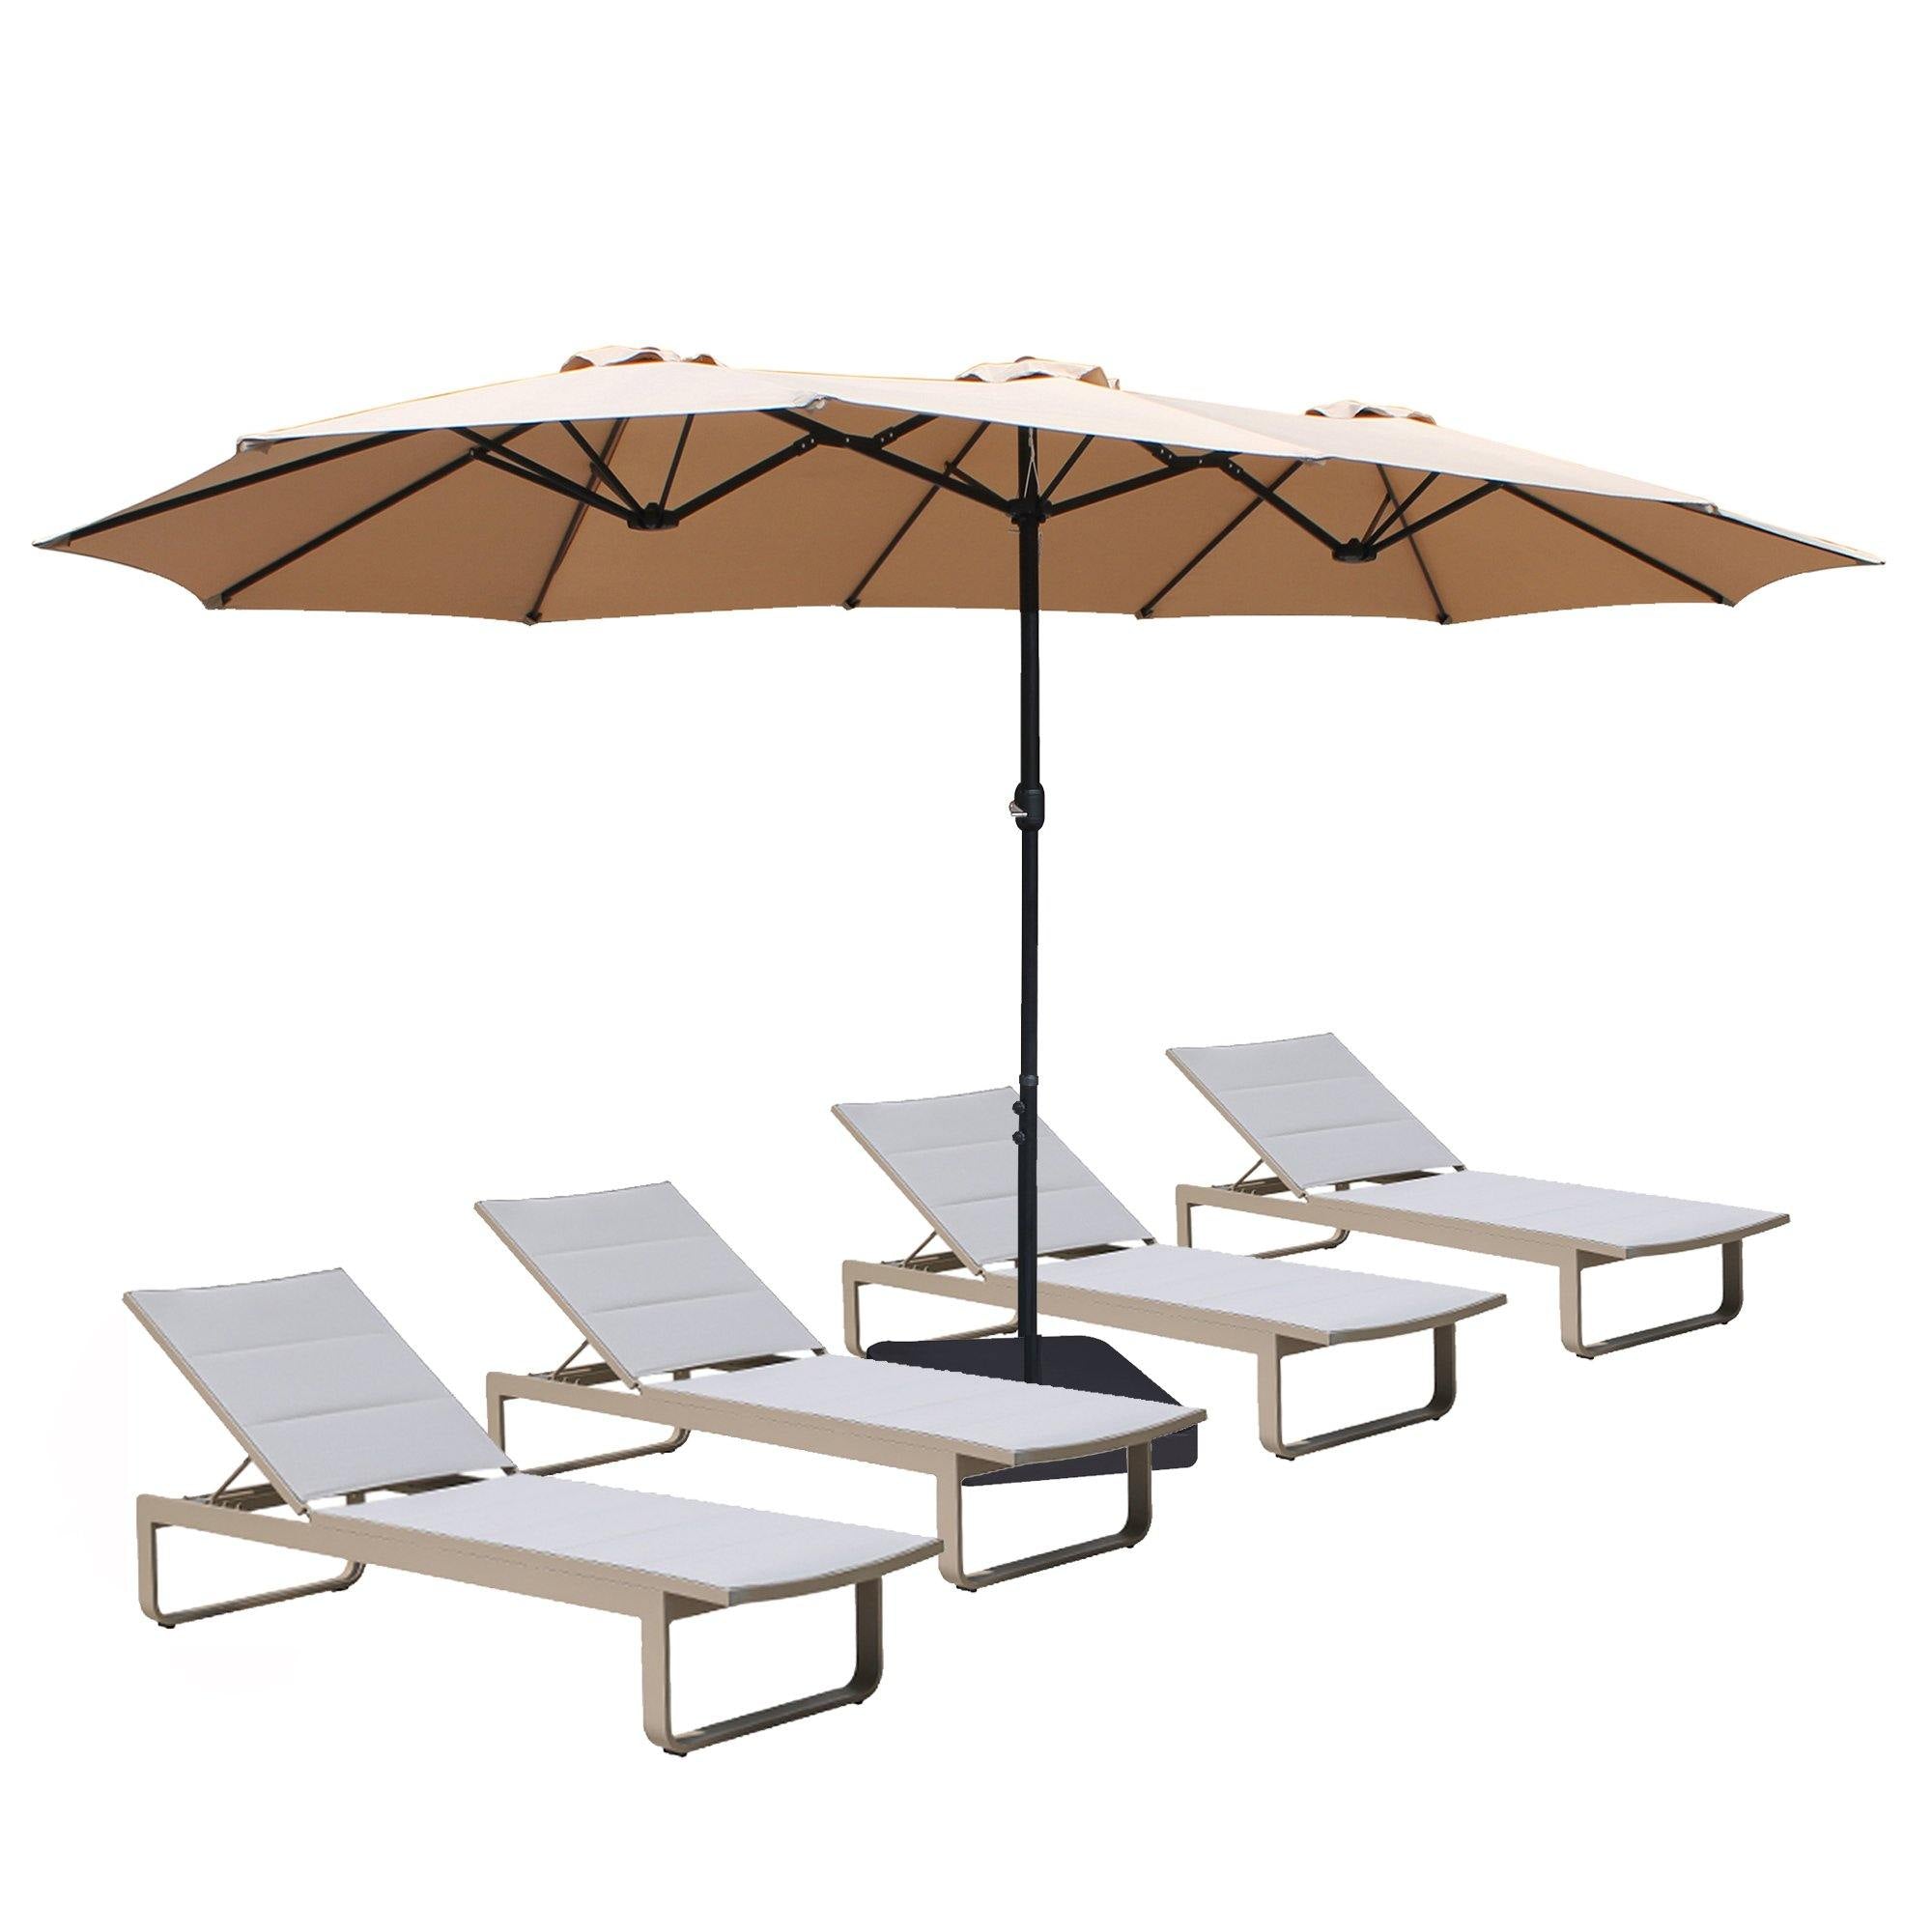 Details about   15Ft Twin Large Patio Umbrella Double Sided Sunshade Canopy with Crank Pool Deck 